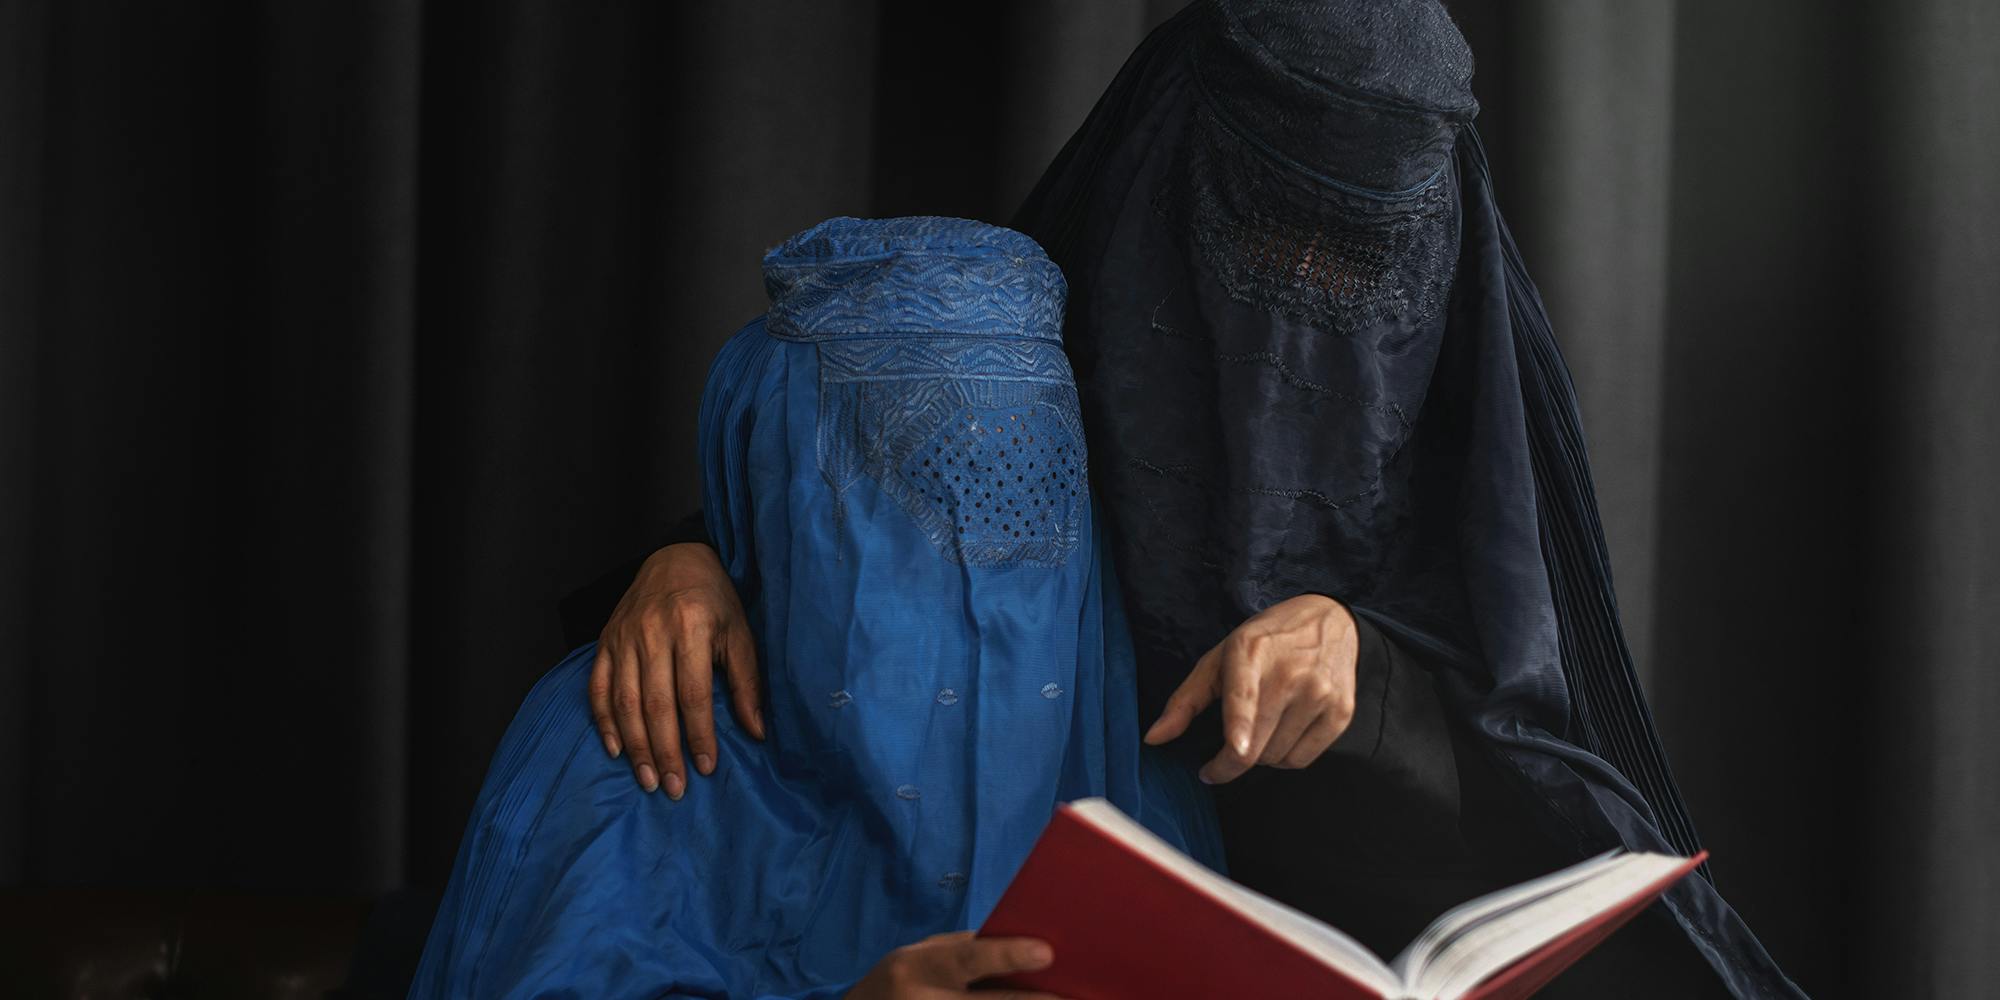 Afghan Muslim women with burka traditional costume, reading holy Quran against the dark background